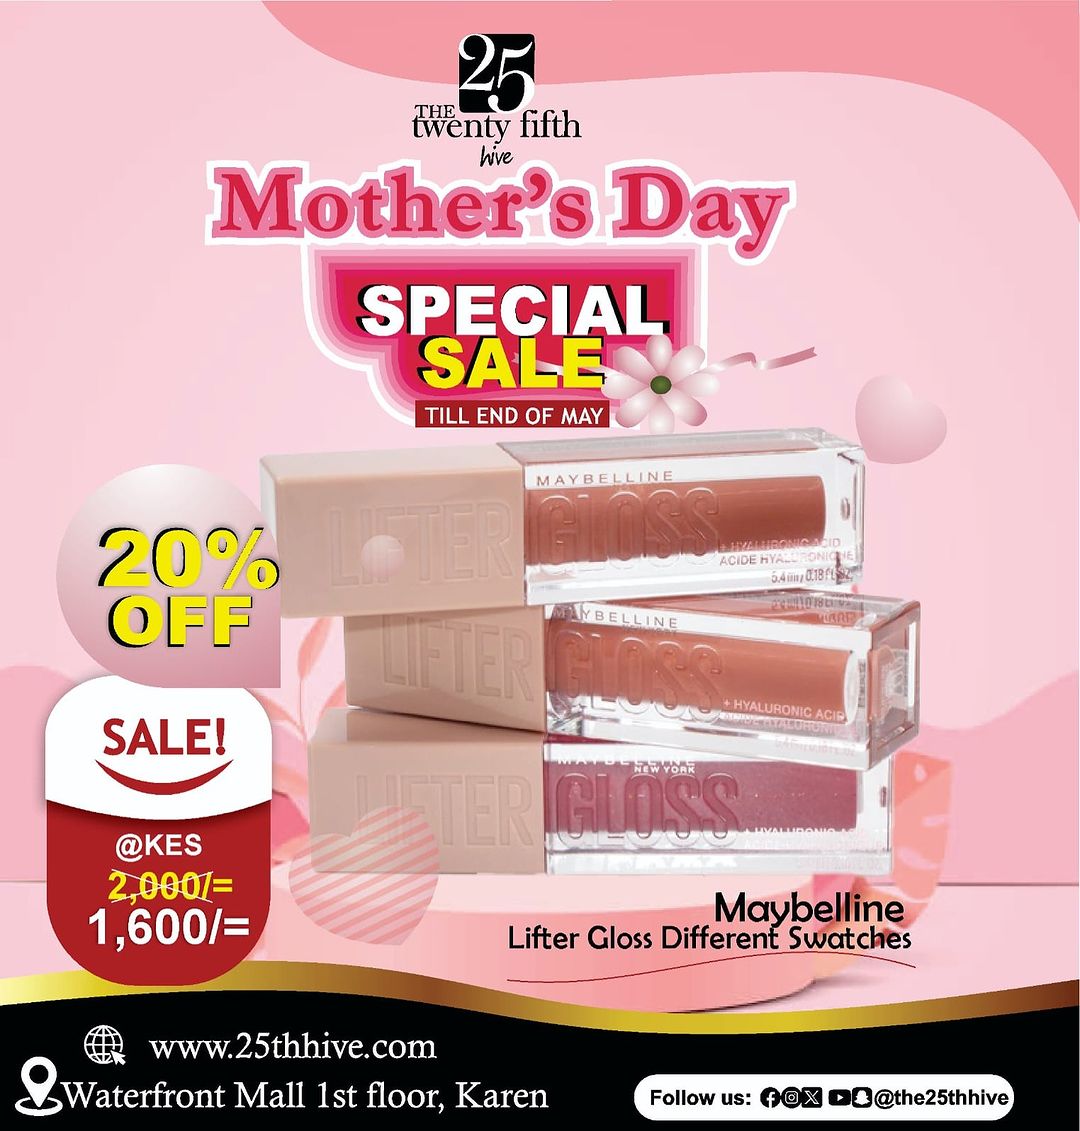 Elevate Mum’s makeup and skincare game this Mother’s Day with @The25thHive's incredible offers on makeup and skincare products this whole month! Swipe to see offers #MothersDay #MothersDayOffer #Makeup #Skincare #25thHive #TWFKaren #YouveArrived